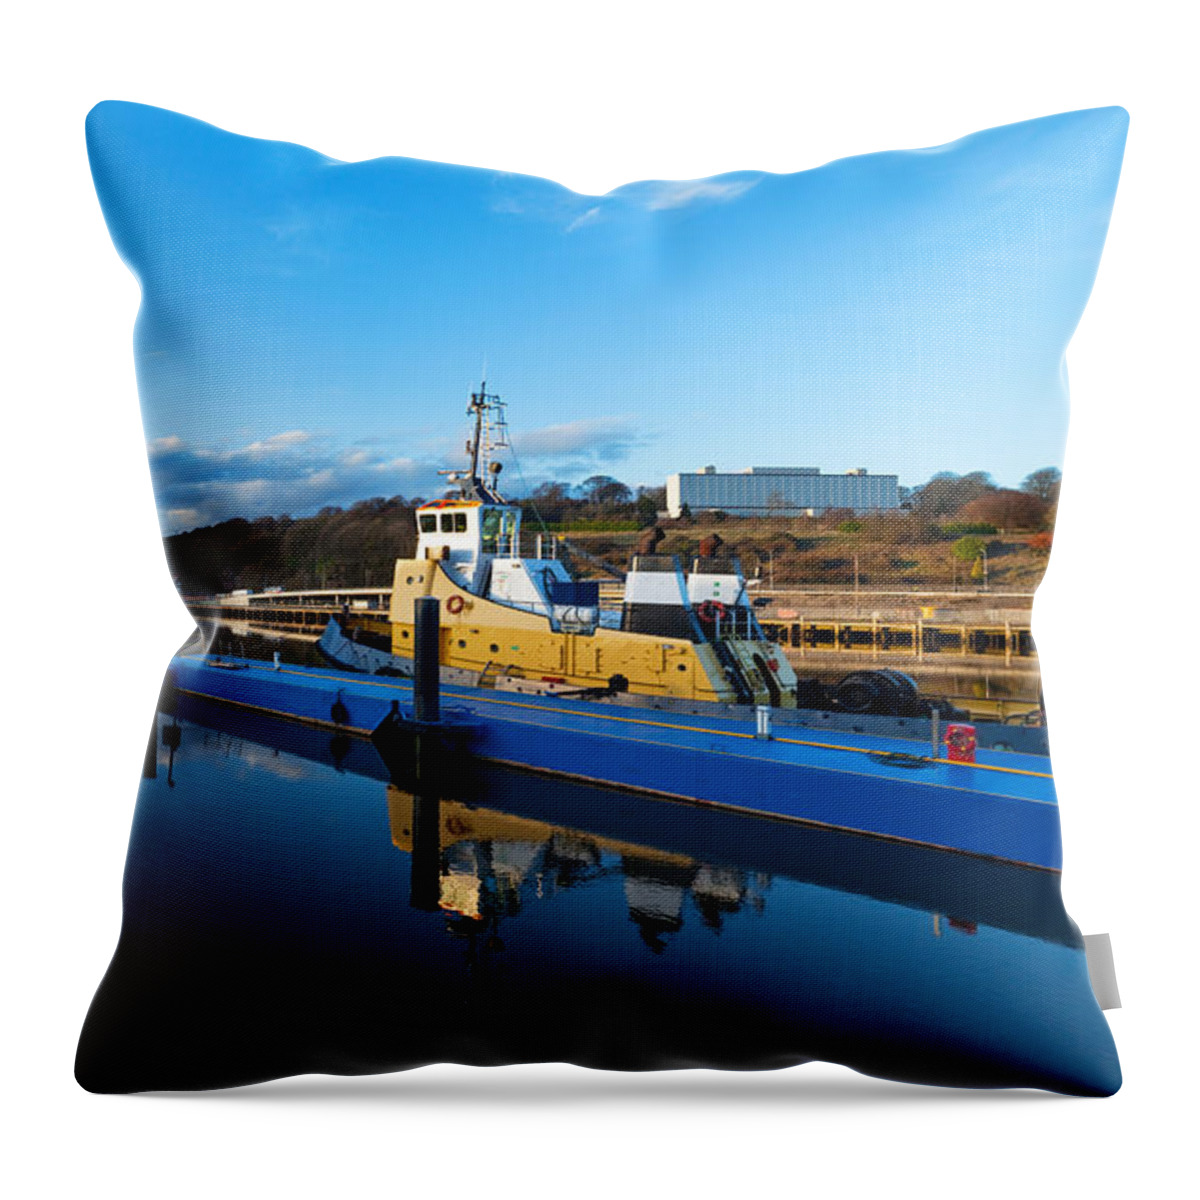 Photography Throw Pillow featuring the photograph Tugboat Moored At The River Suir by Panoramic Images